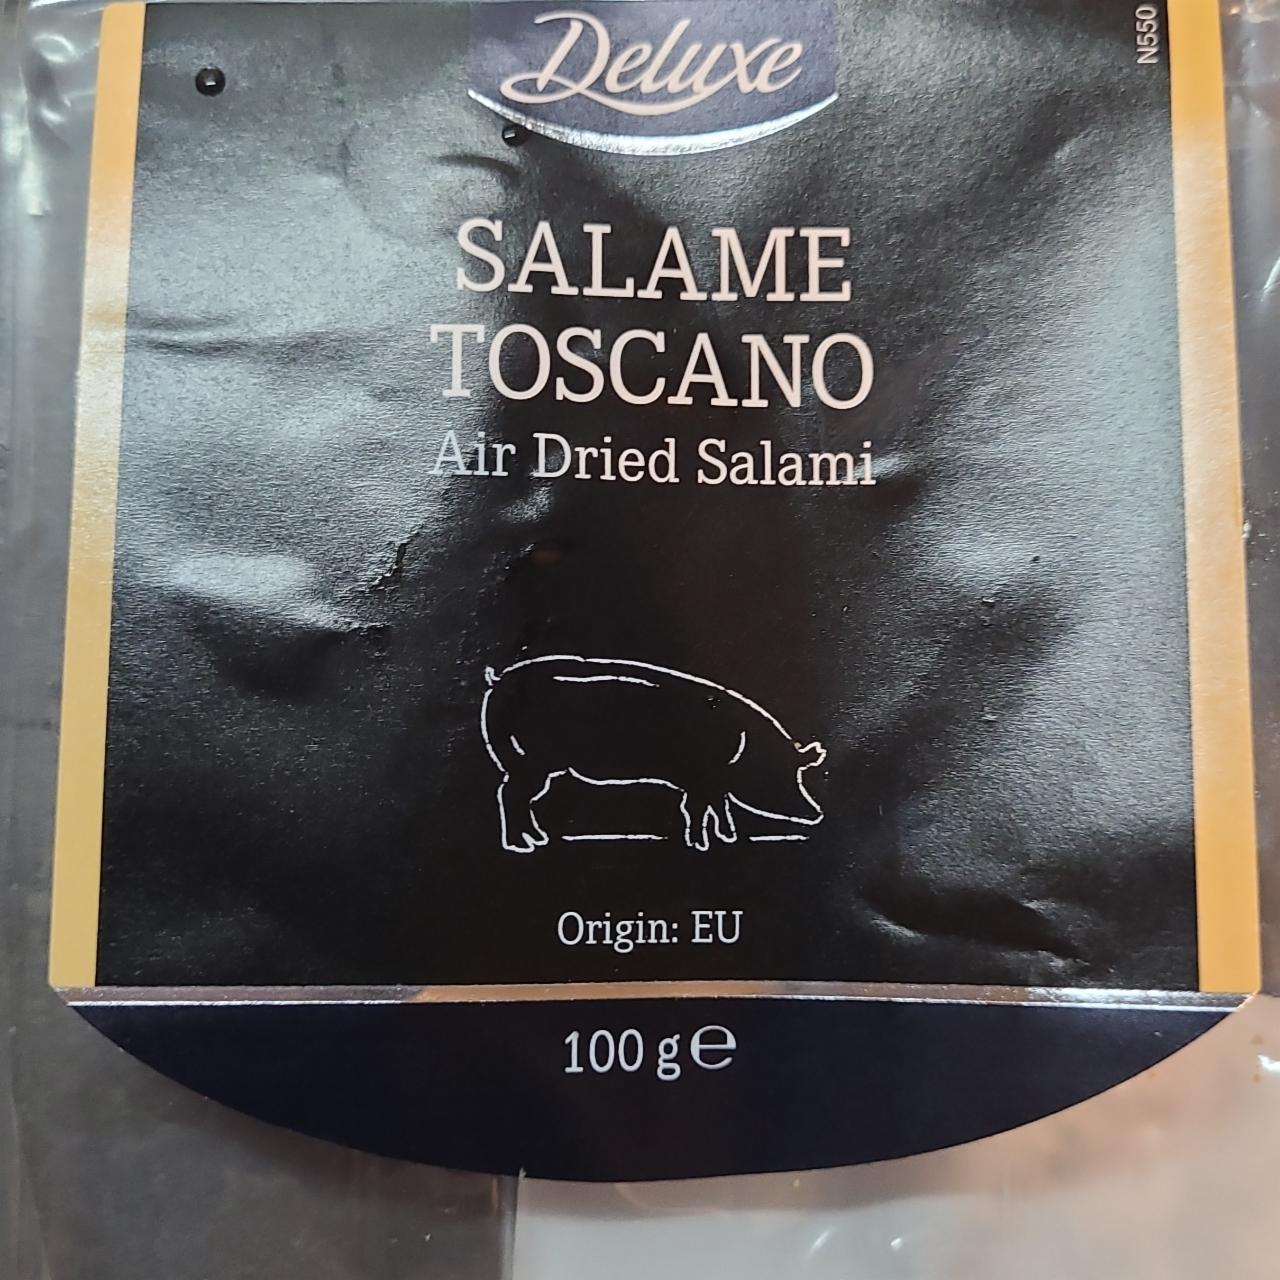 Fotografie - Salame Toscano air dried salami Deluxe